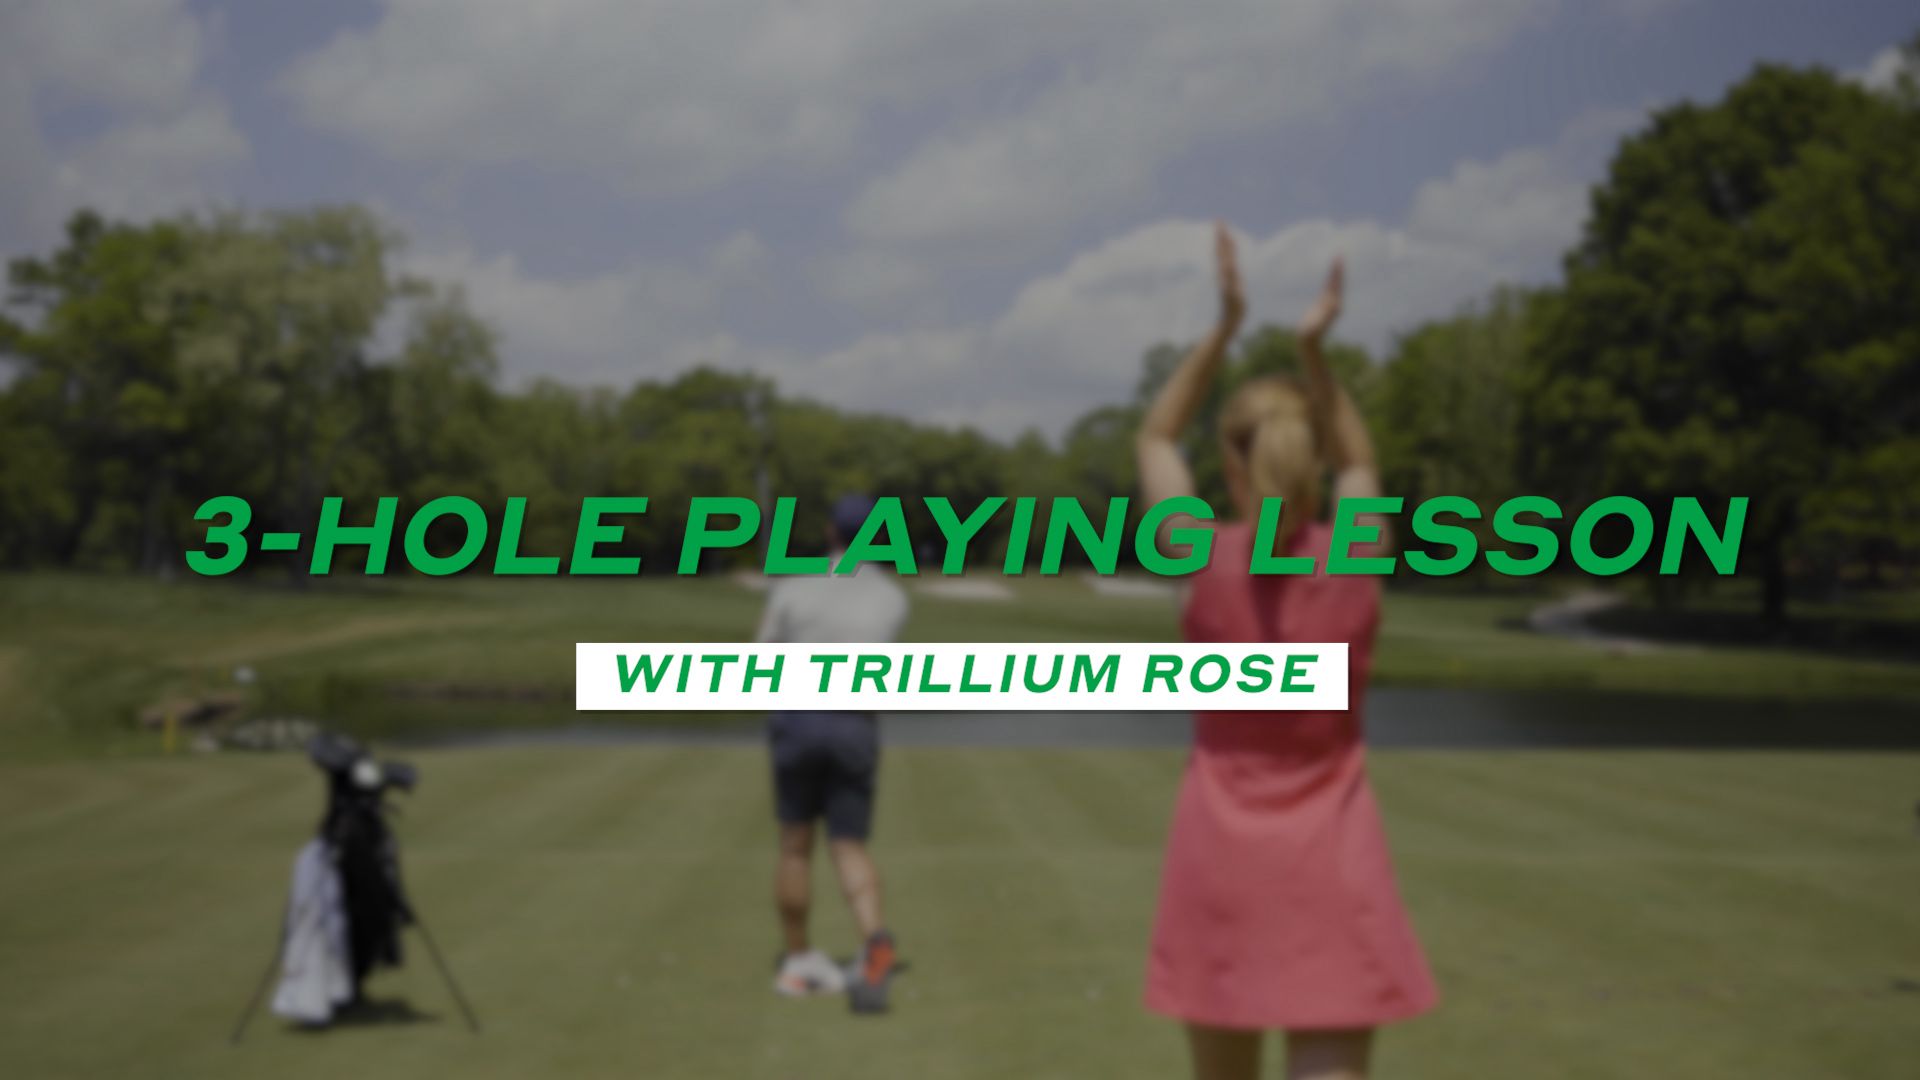 Use this visual drill from a Top 100 Teacher to square your club face